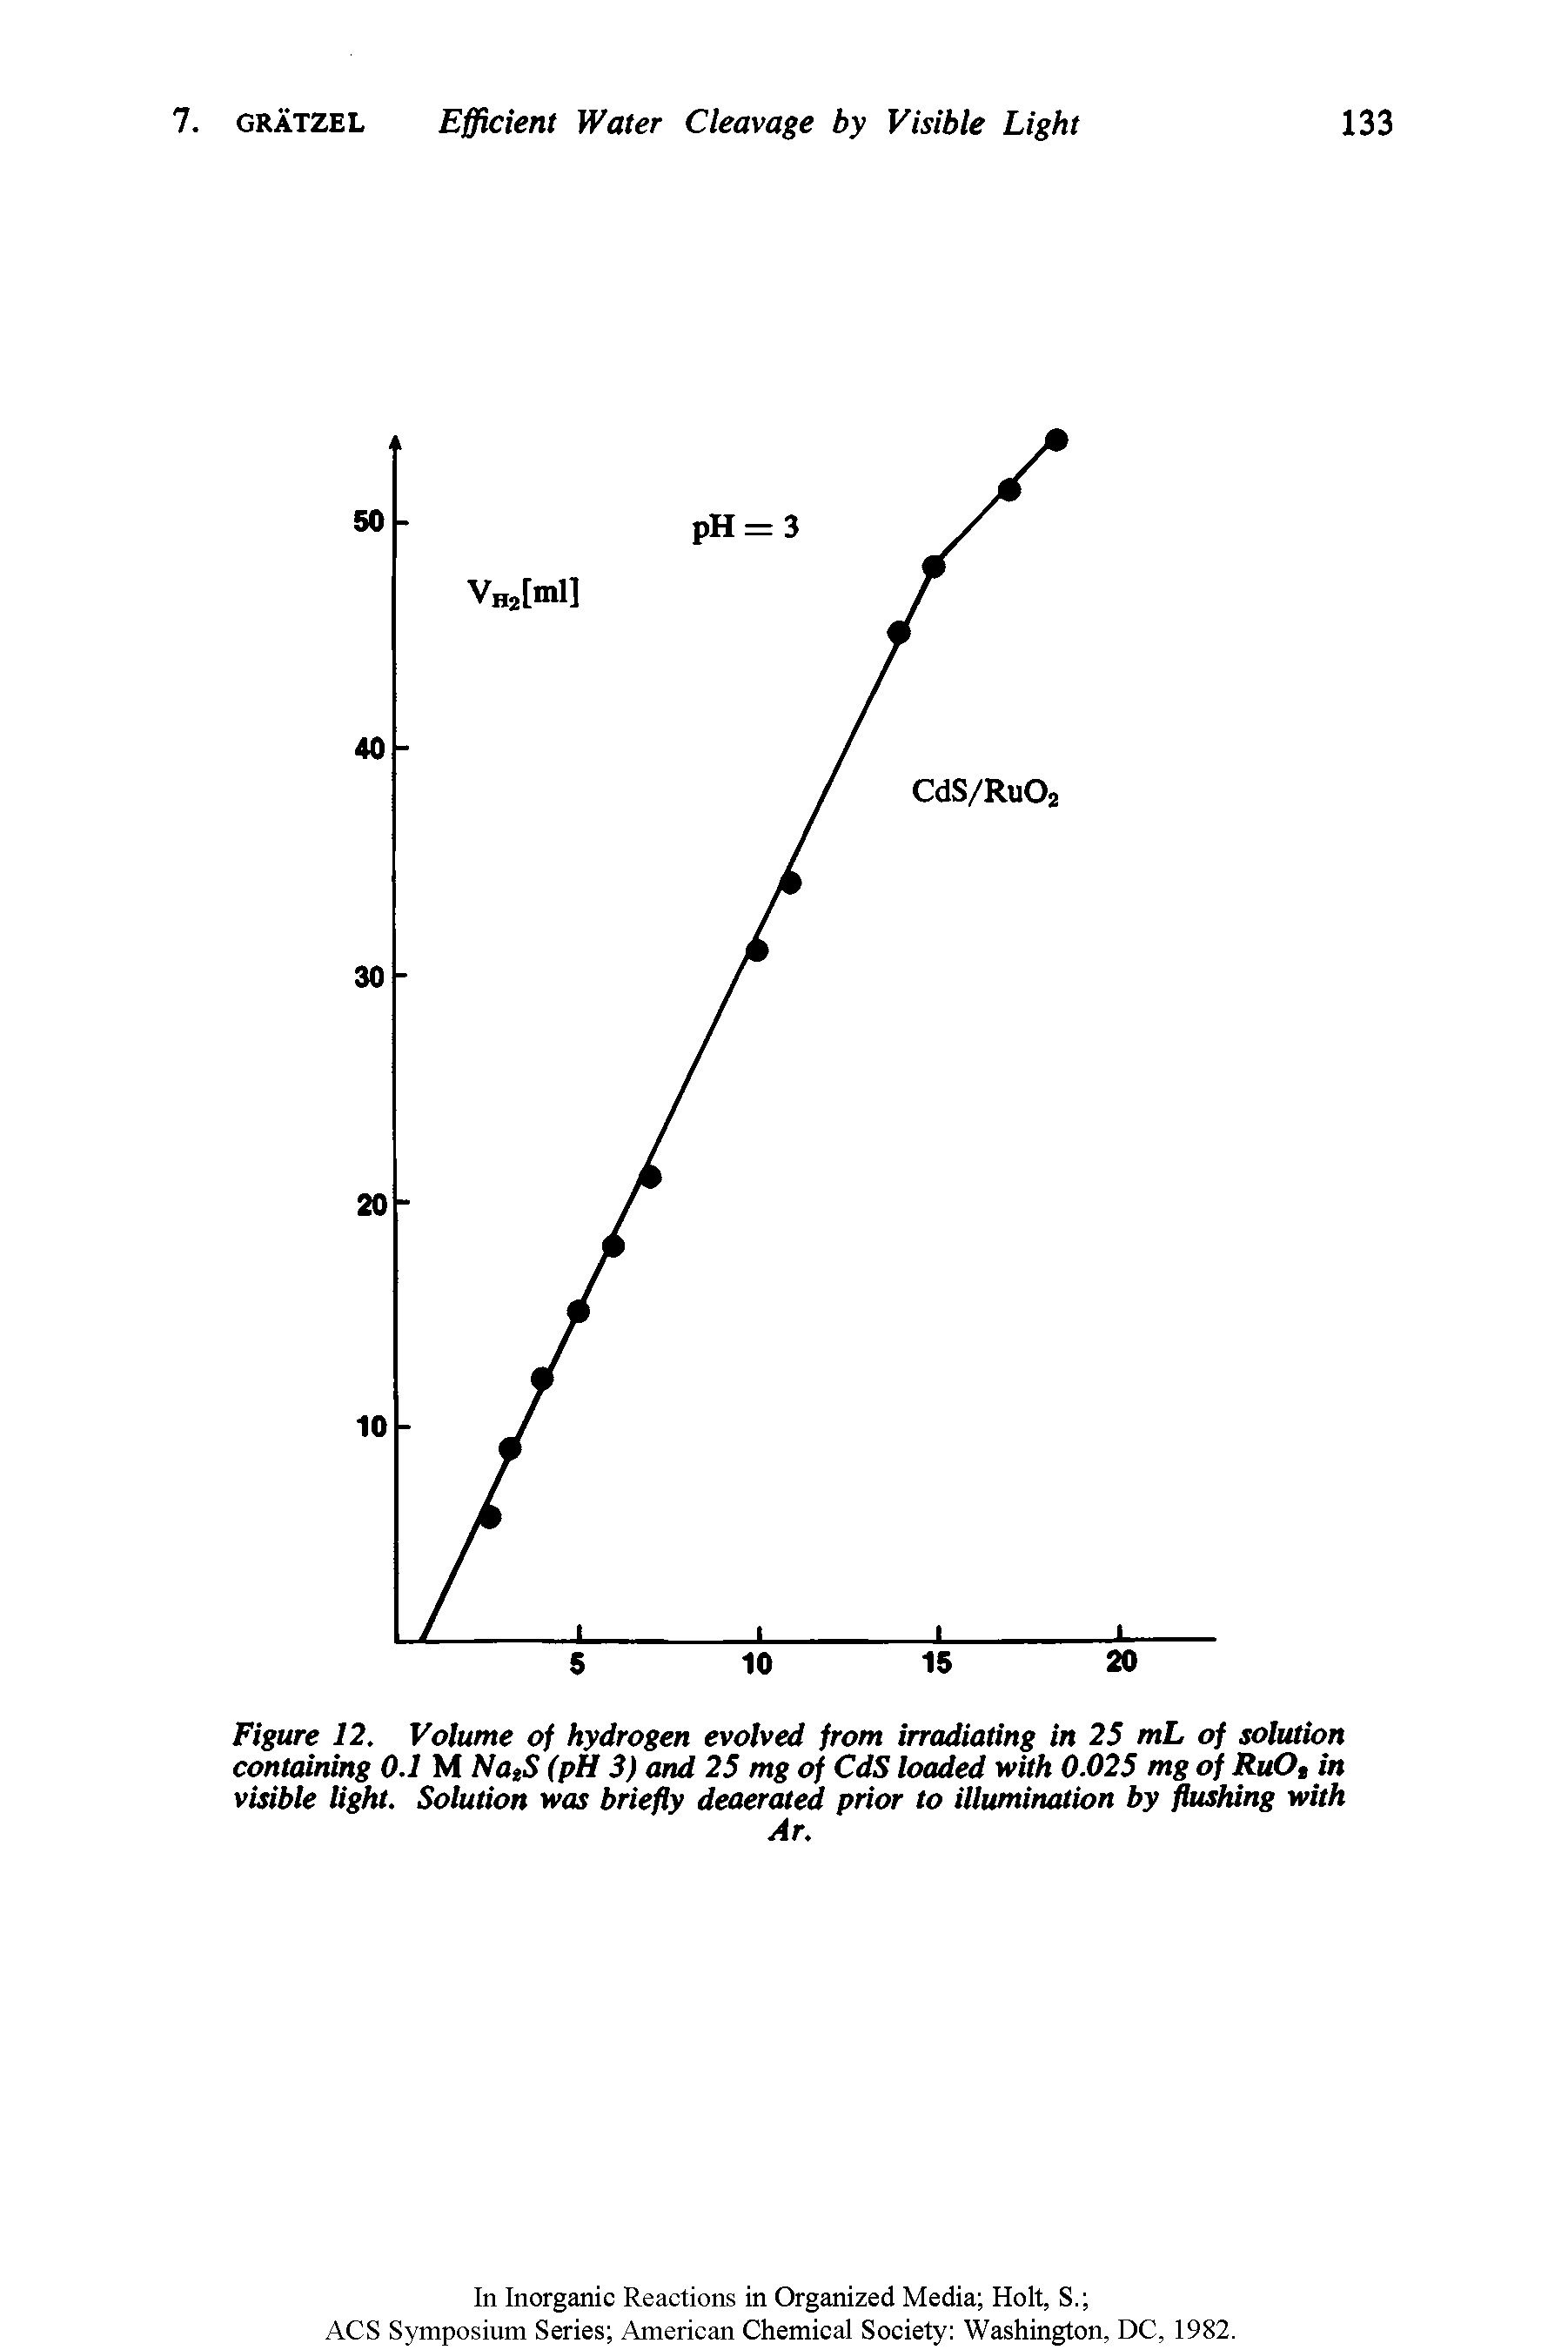 Figure 12. Volume of hydrogen evolved from irradiating in 25 mL of solution containing 0.1 M (pH 3) and 25 mg of CdS loaded with 0.025 mg of RuOtin visible light. Solution was briefly deaerated prior to illumination by flushing with...